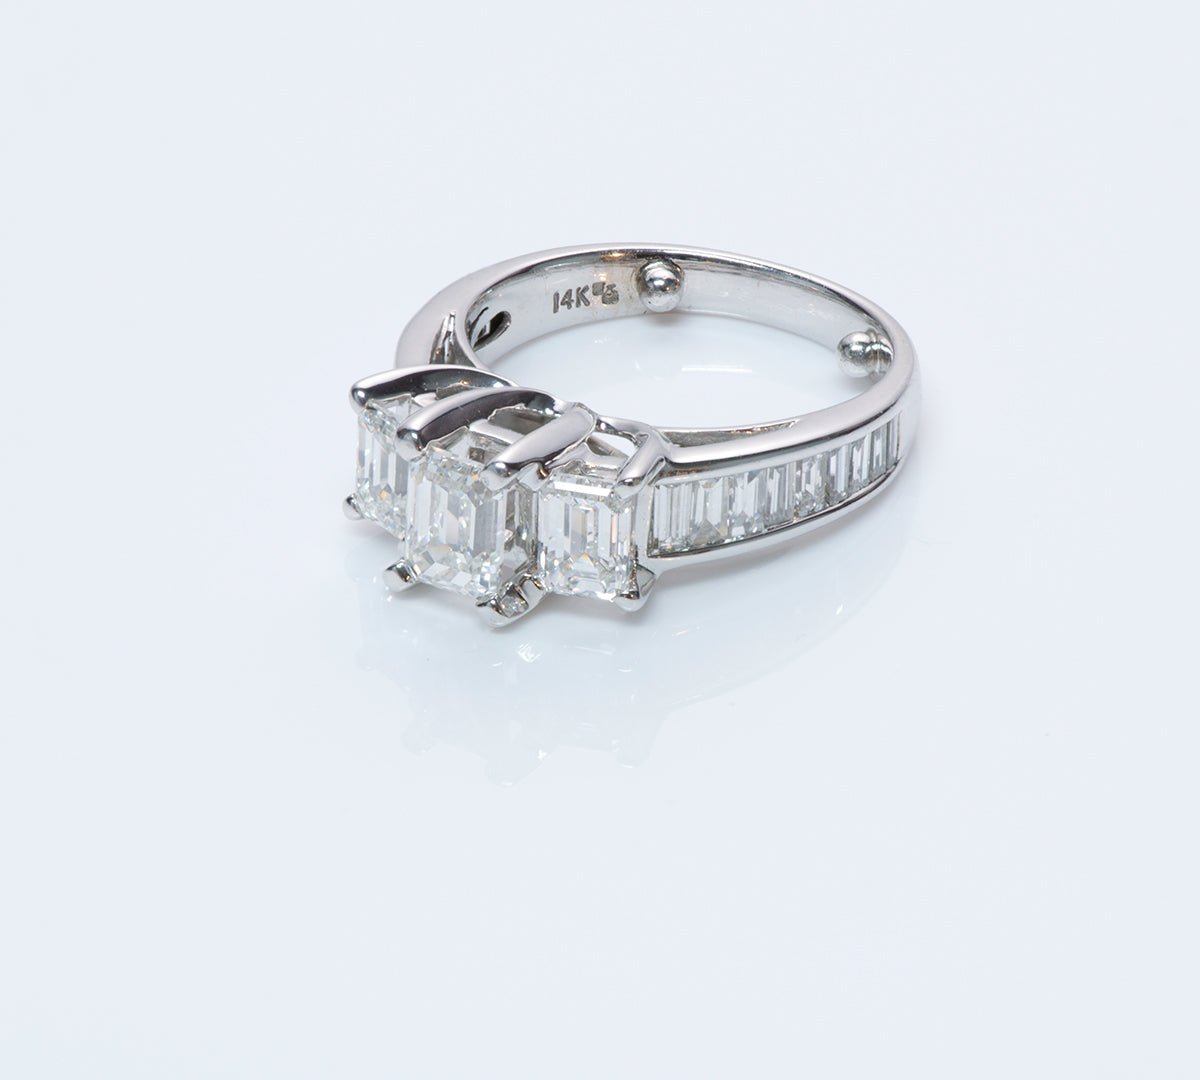 Emerald Cut Diamond Gold Engagement Ring - DSF Antique Jewelry